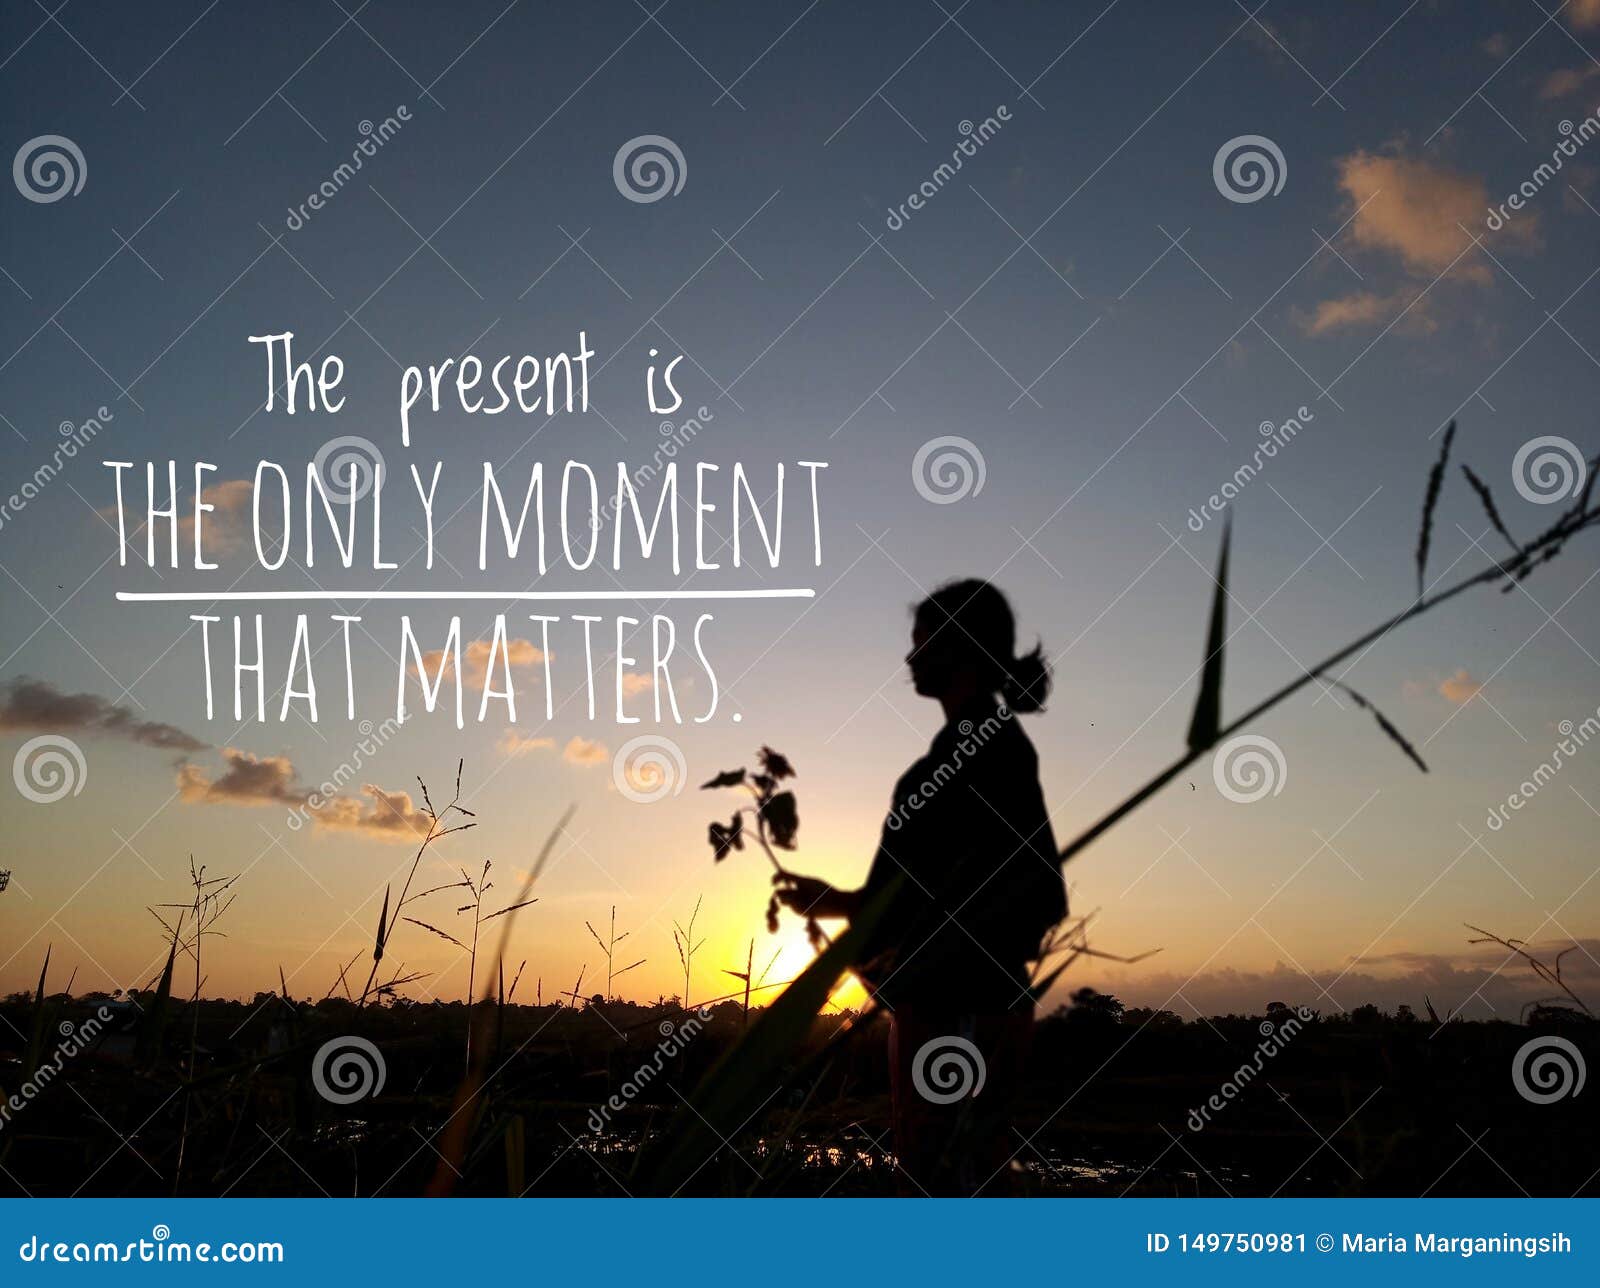 the present is the only moment that matters, silhouette image with text quote words of wisdom